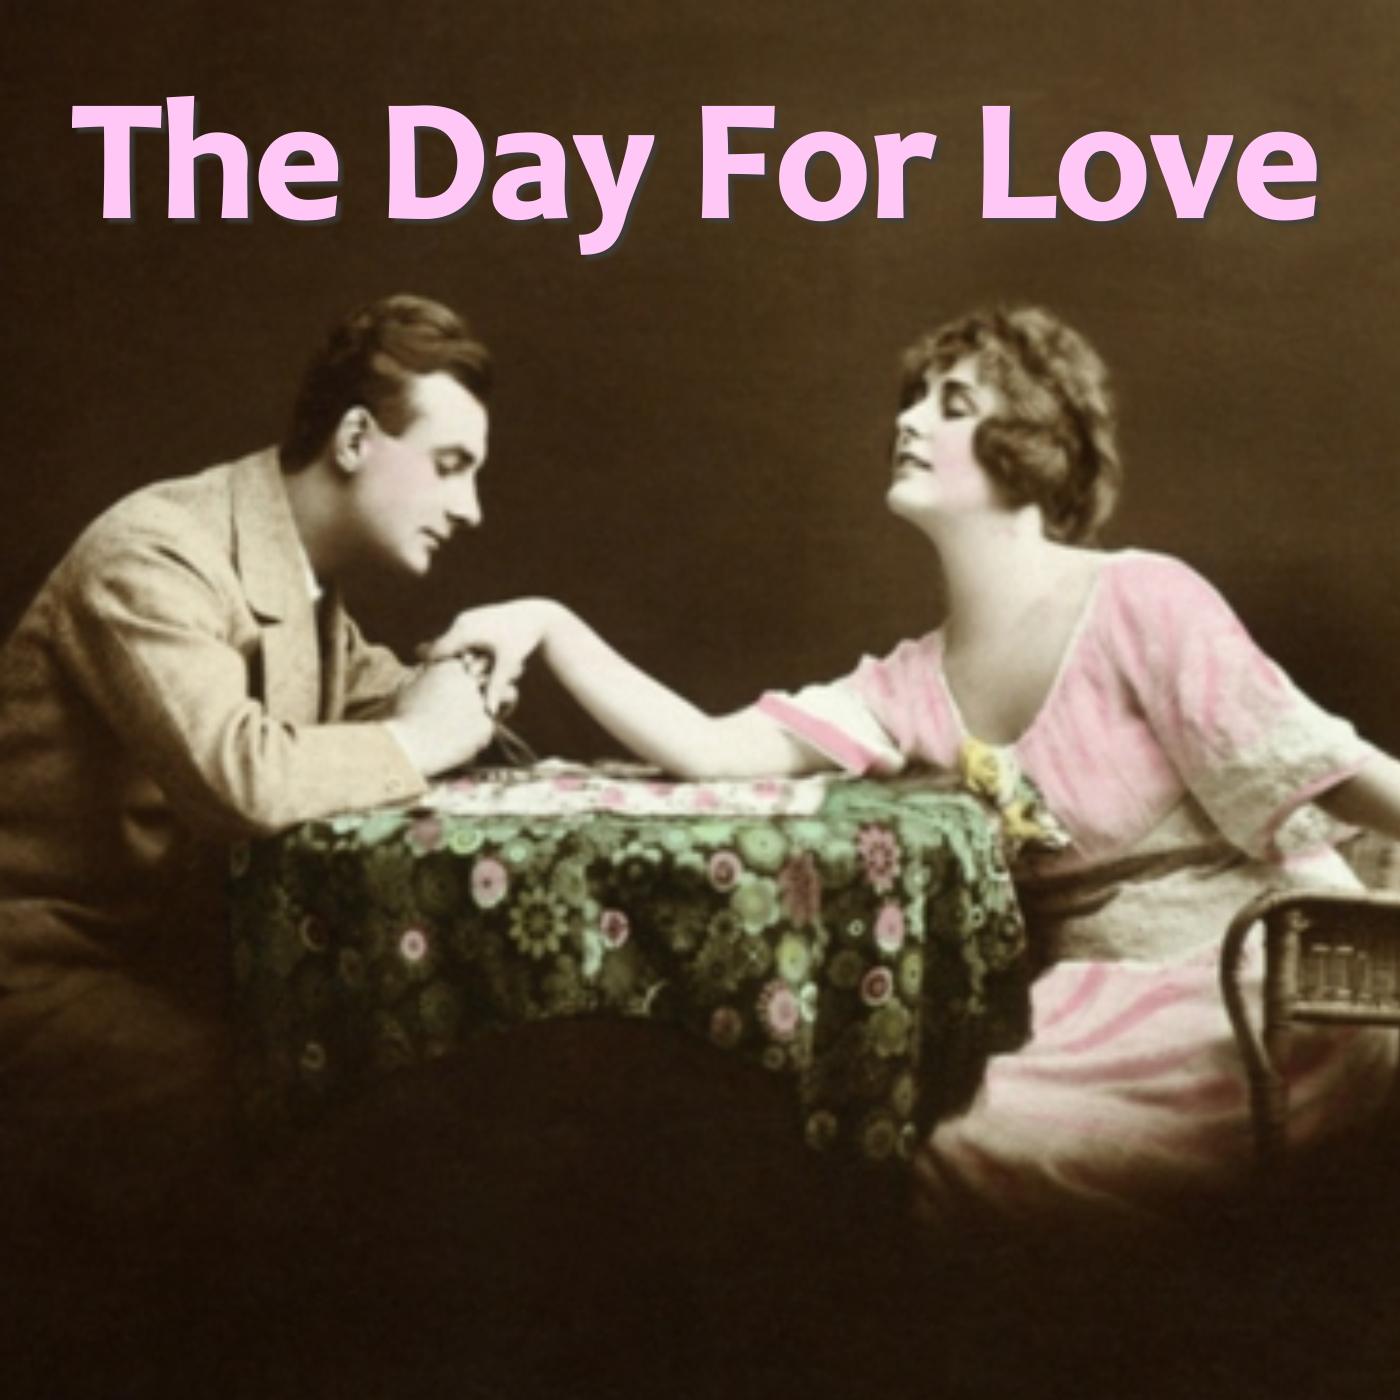 The Day For Love